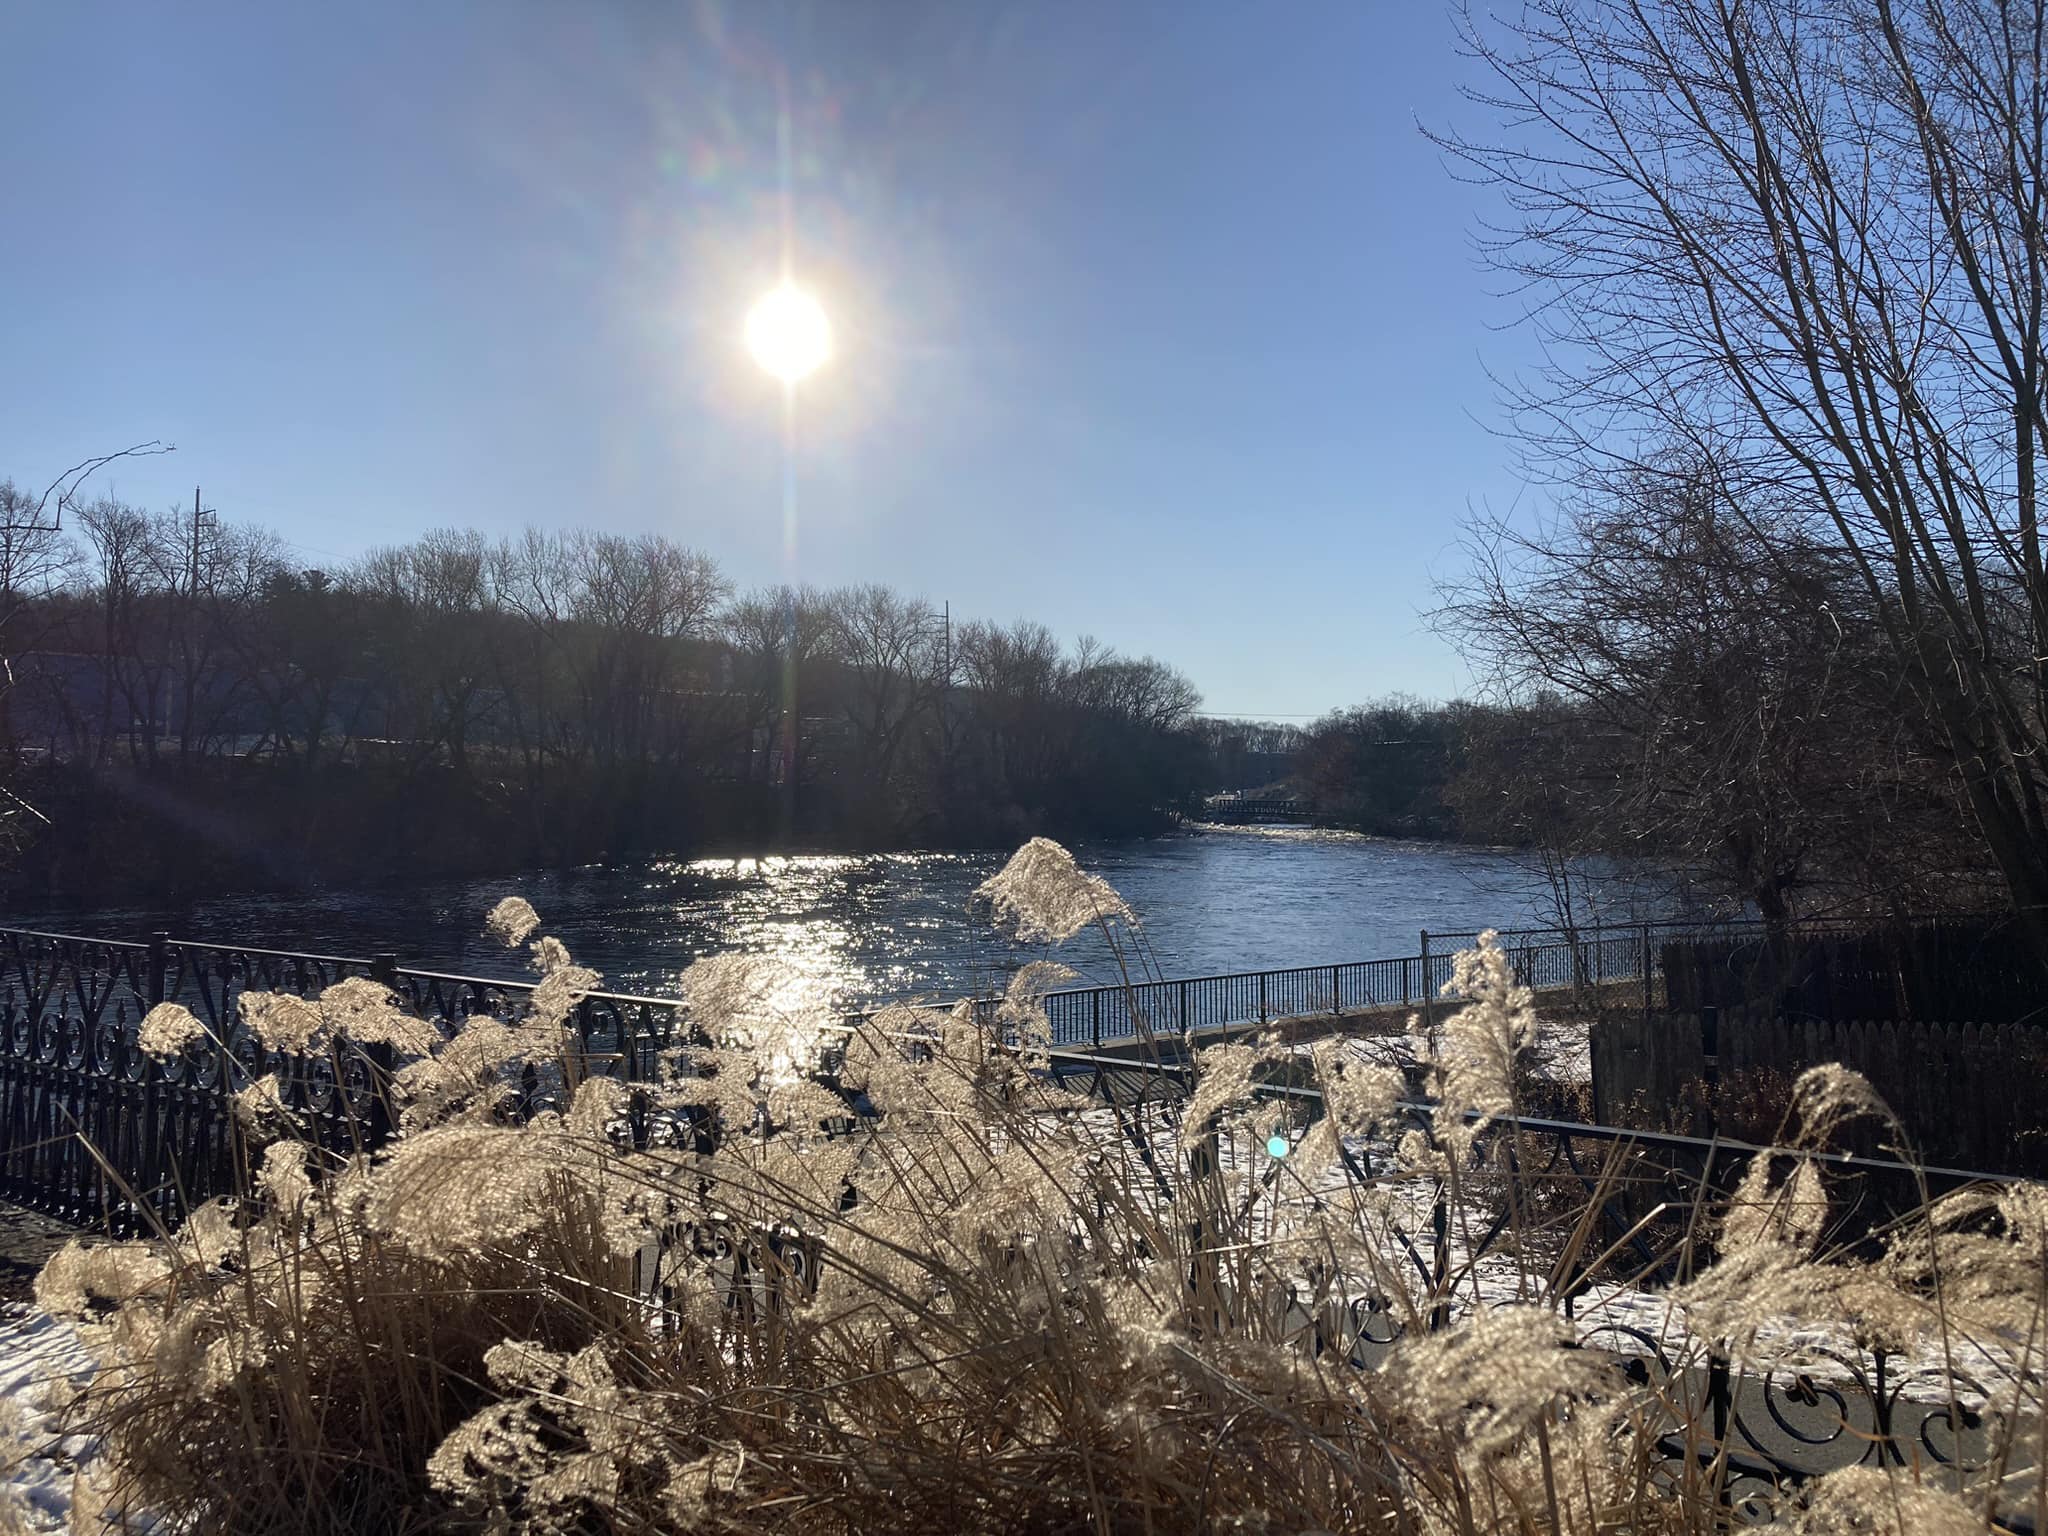 Photo of a snowy riverside on a bright-blue day, with wintery grasses in the foreground